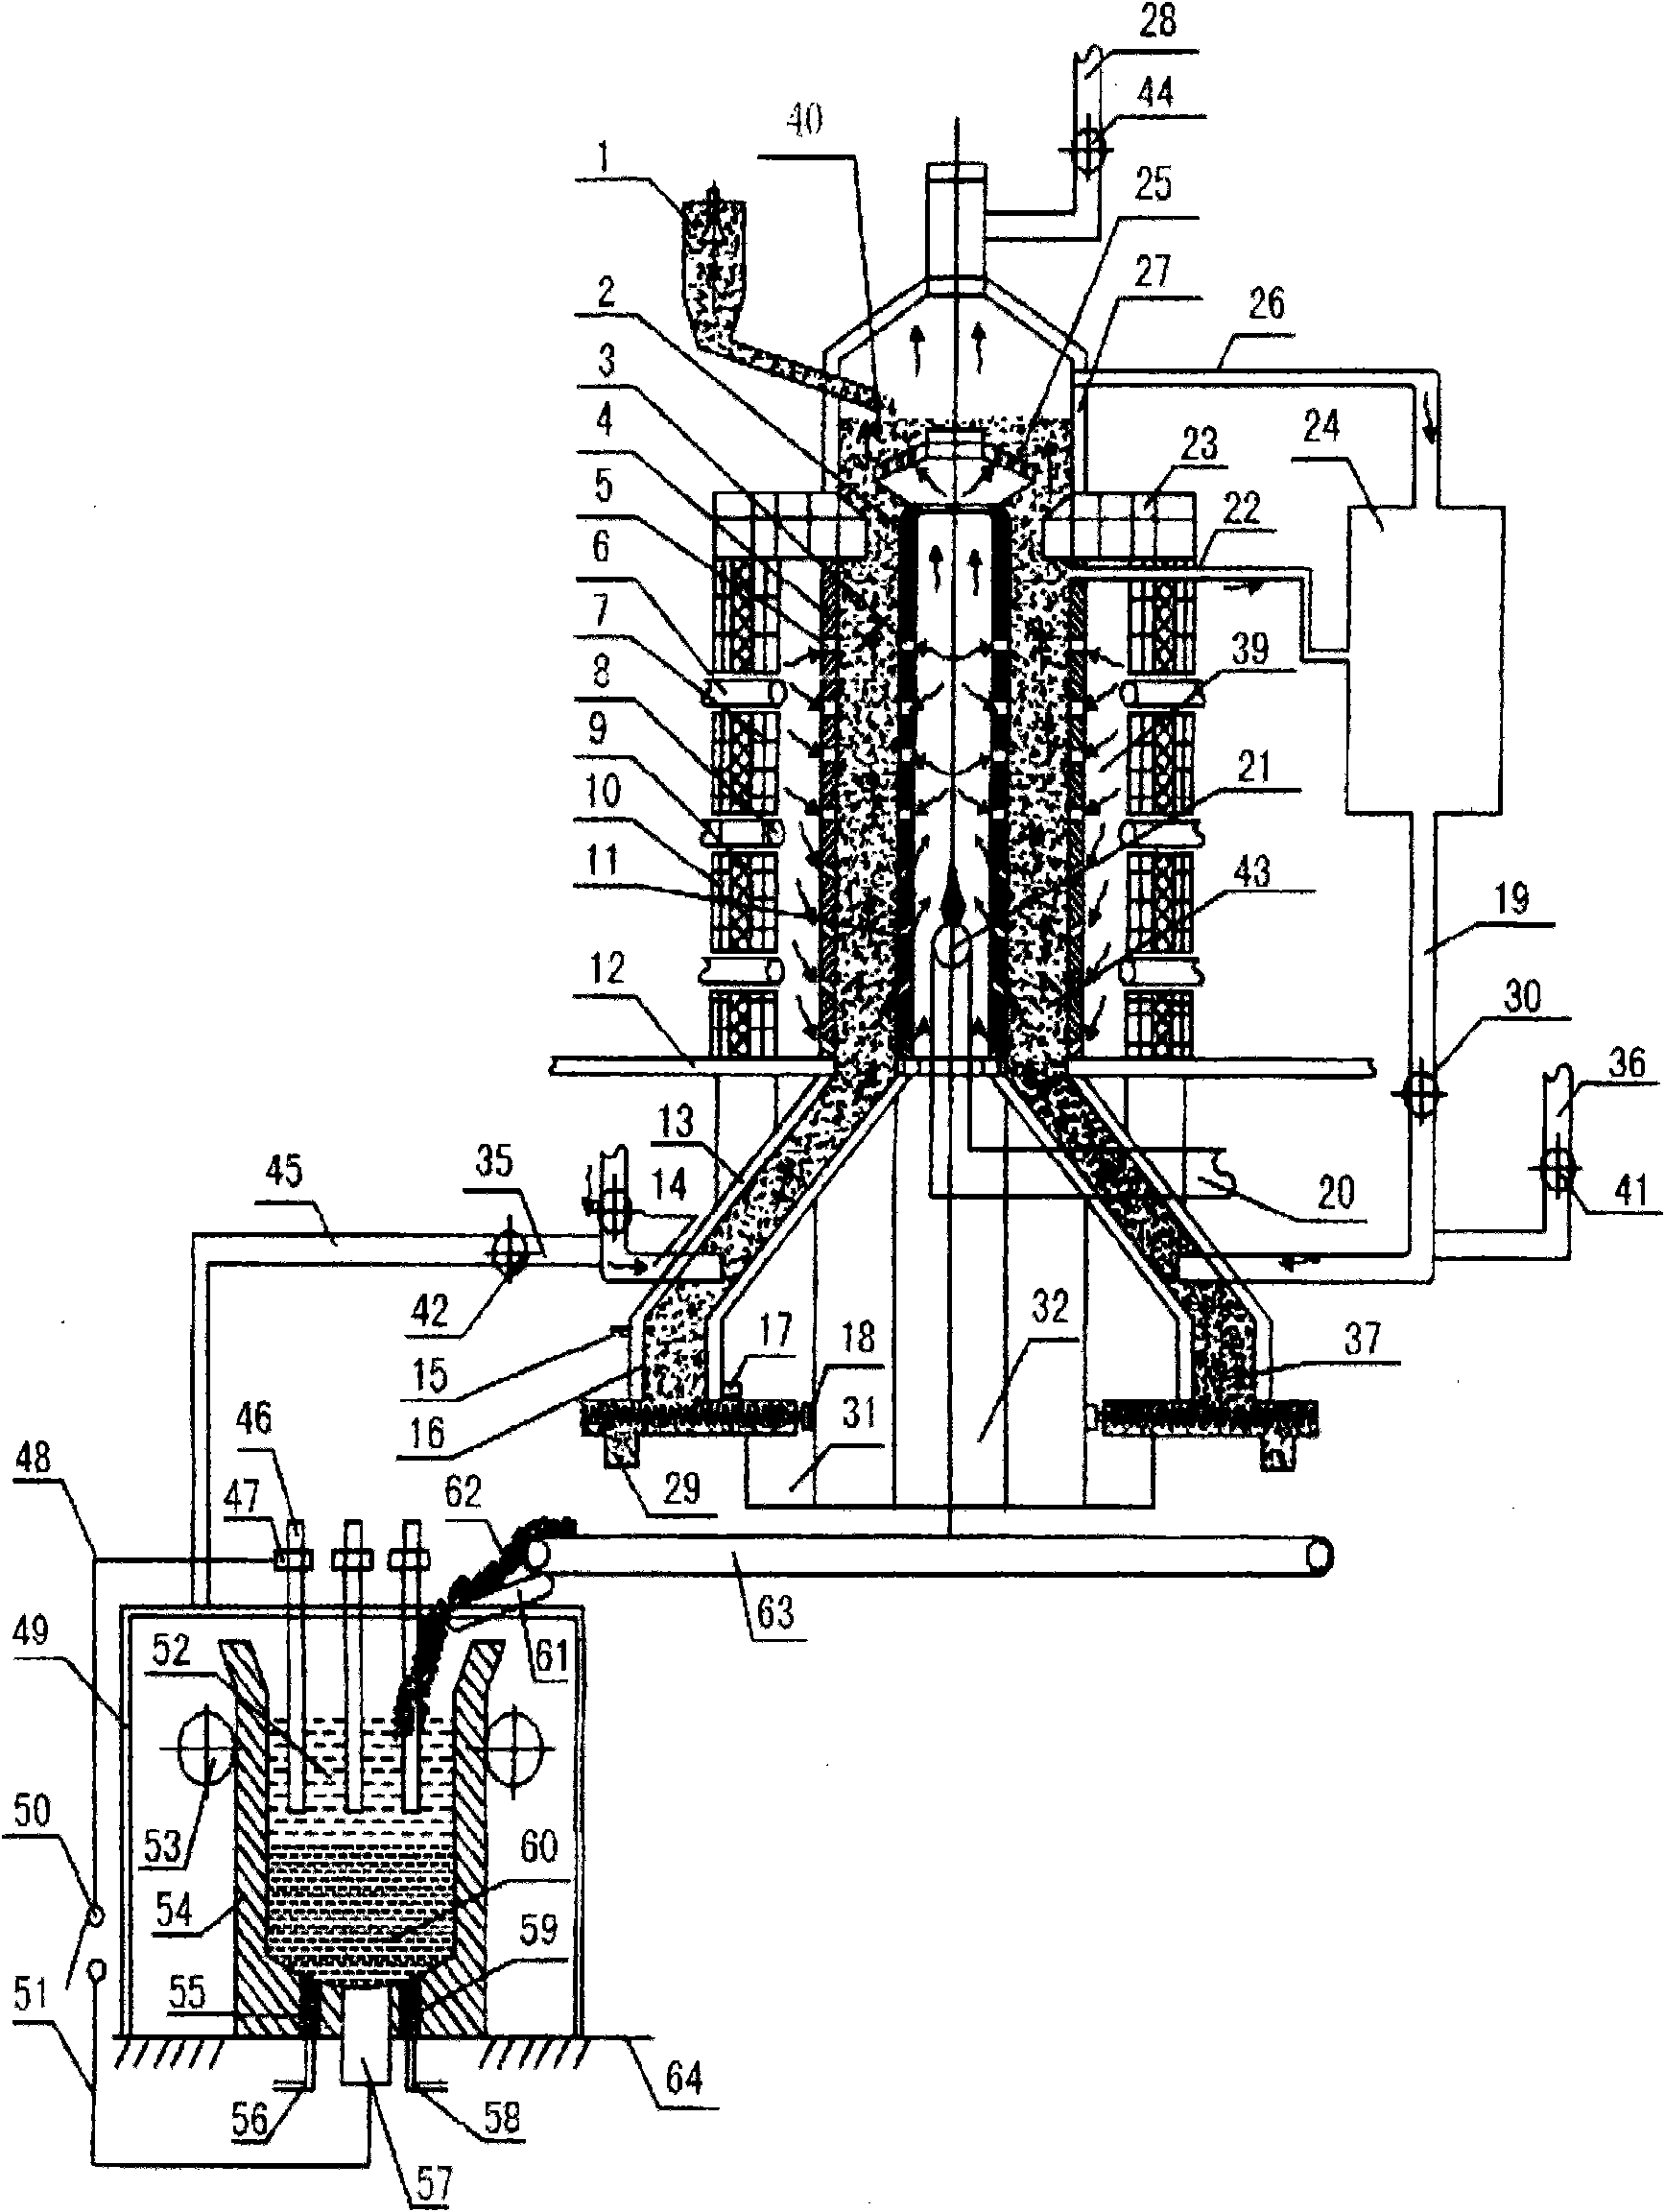 Process and device for smelting chromium irons and chromium-containing molten iron by using chromium ore powder